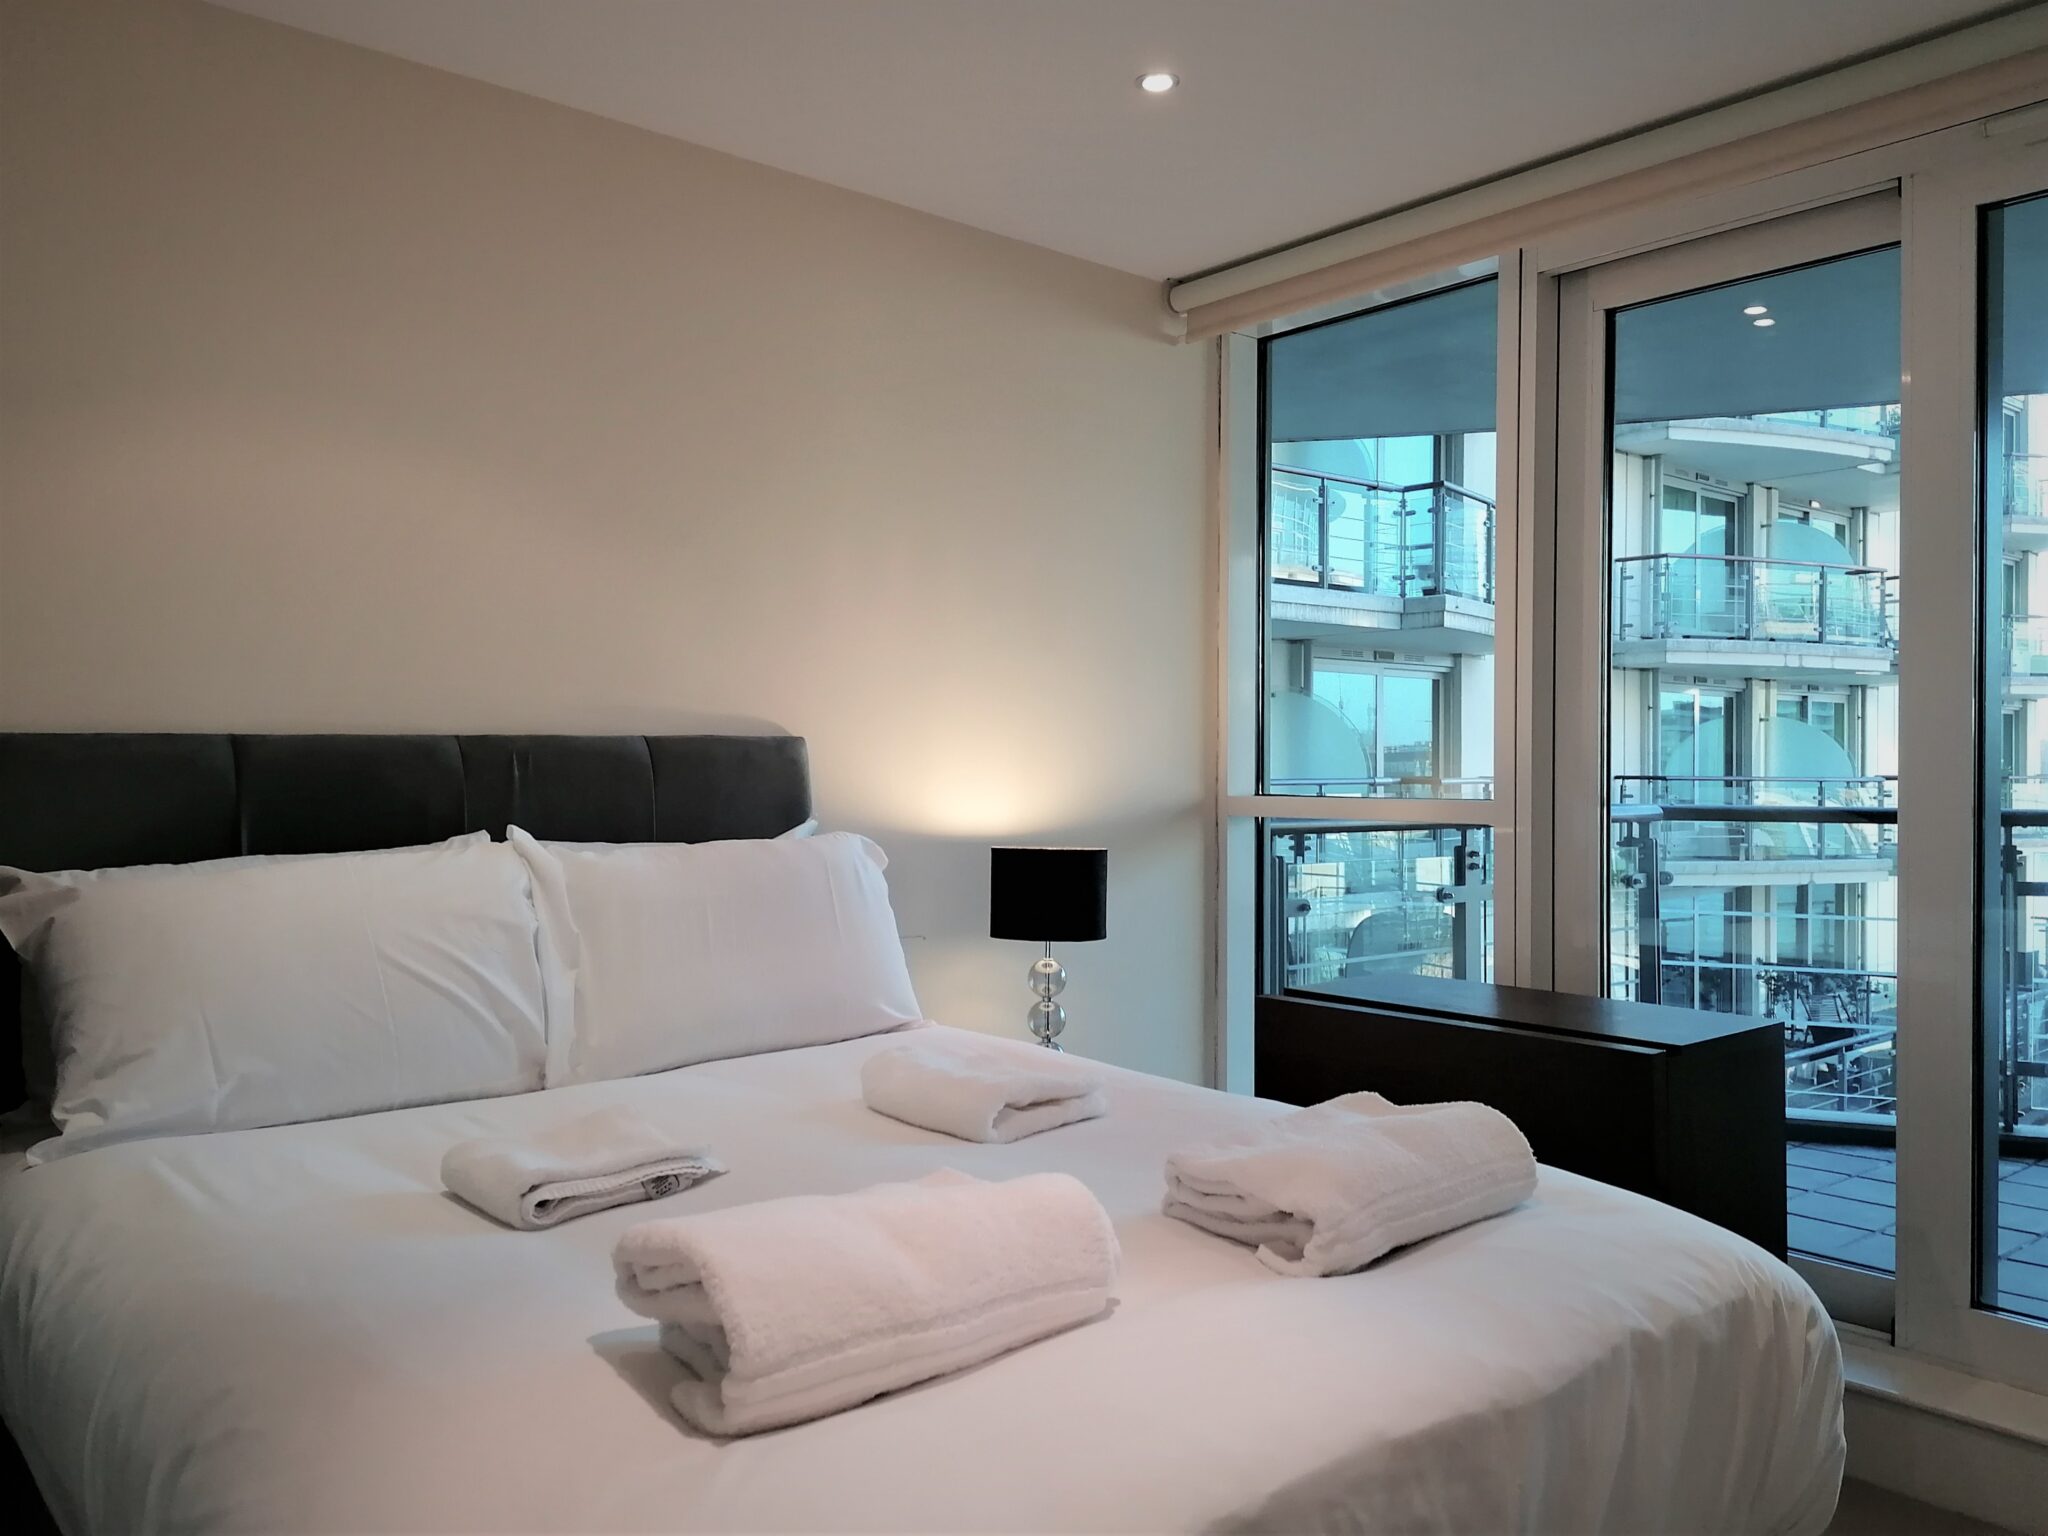 Corporate Serviced Apartments Harrow - West London Serviced Apartments - London | Urban Stay